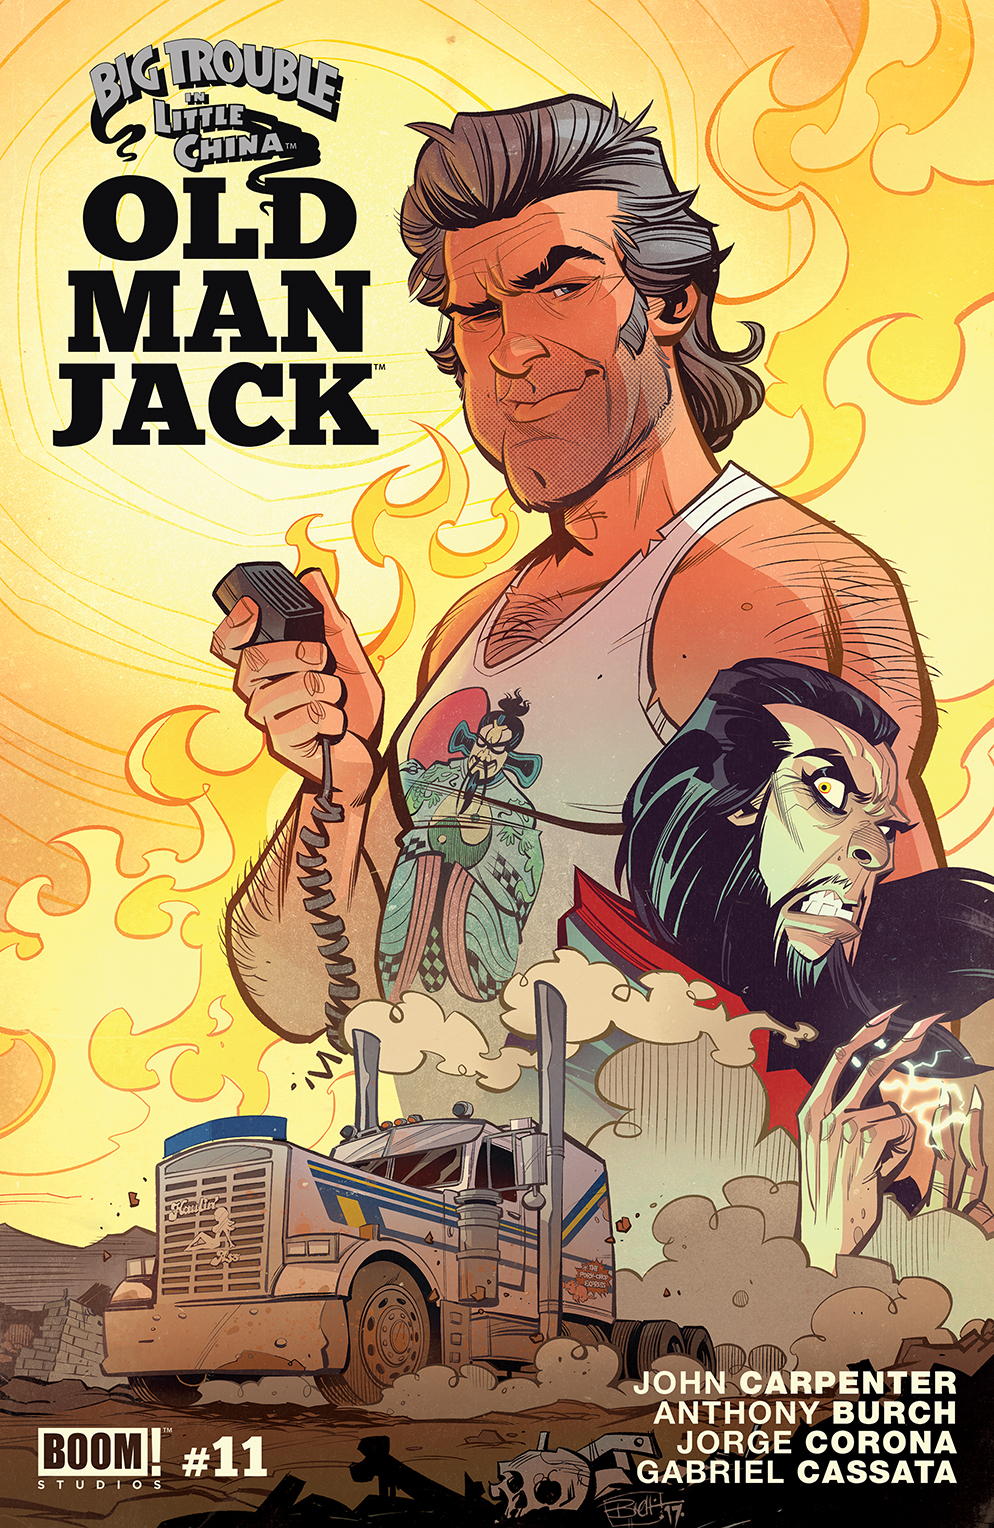 BIG TROUBLE IN LITTLE CHINA OLD MAN JACK #11